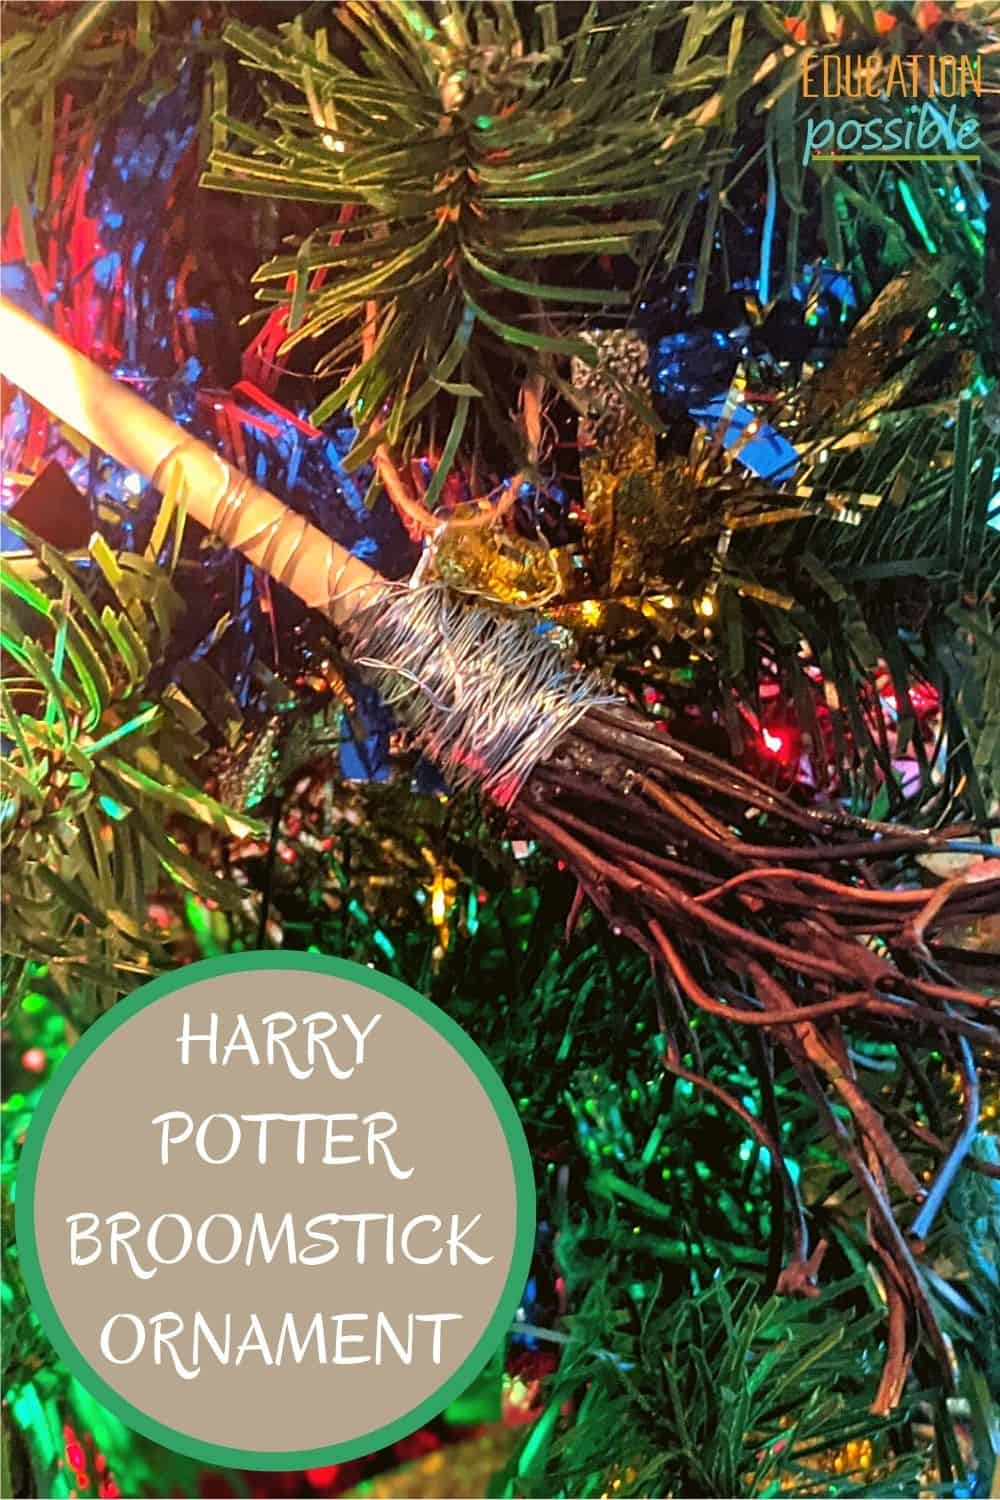 How to Make Your Own Harry Potter Broom Ornament